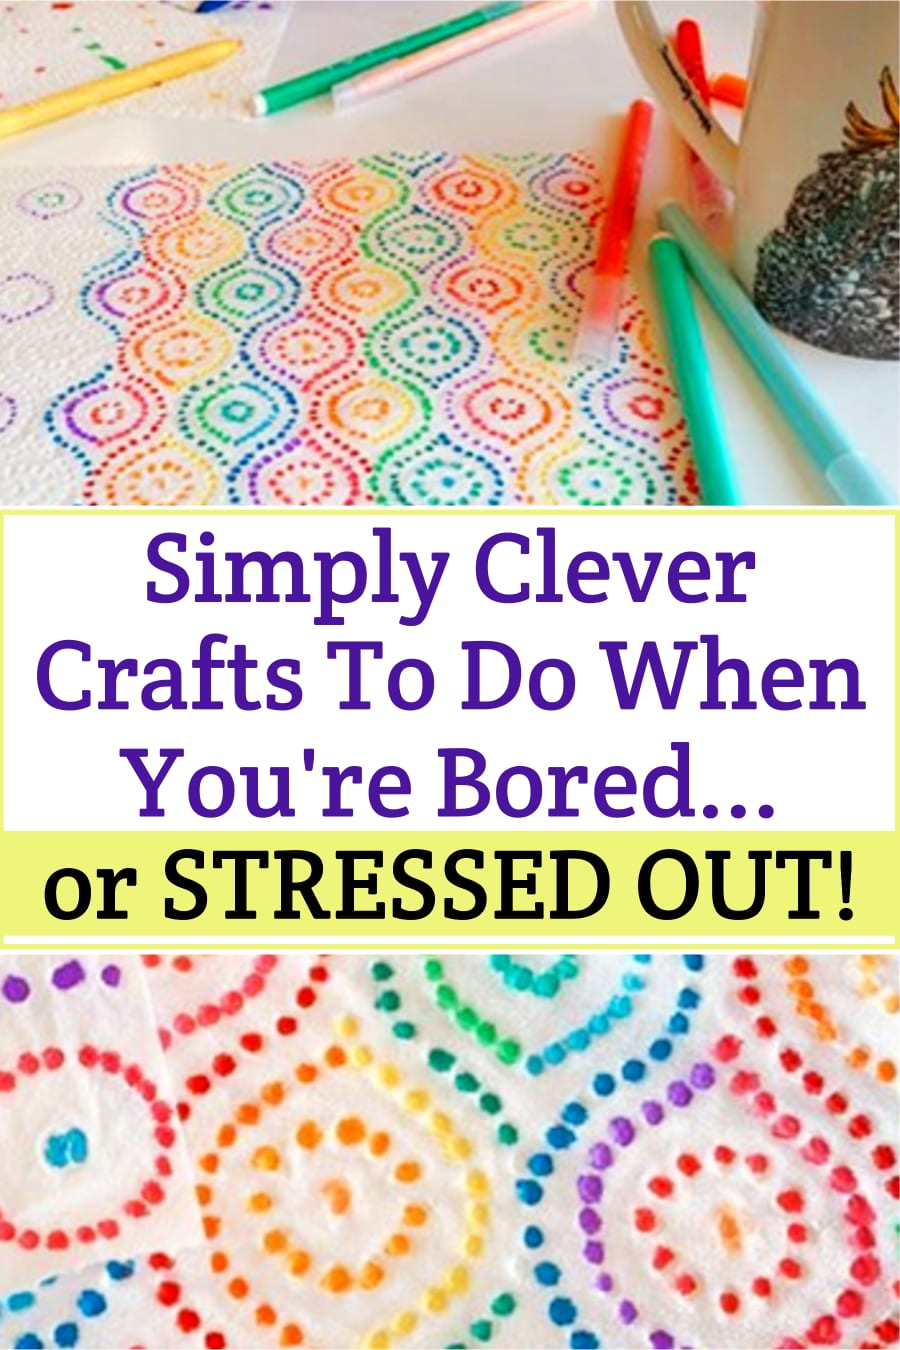 Clever Crafts To Do When You're Bored - Or STRESSED - Clever DIY Ideas - Clever Crafts To Do When You're Bored - Or STRESSED - Clever DIY Ideas -   16 diy To Do When Bored paper ideas